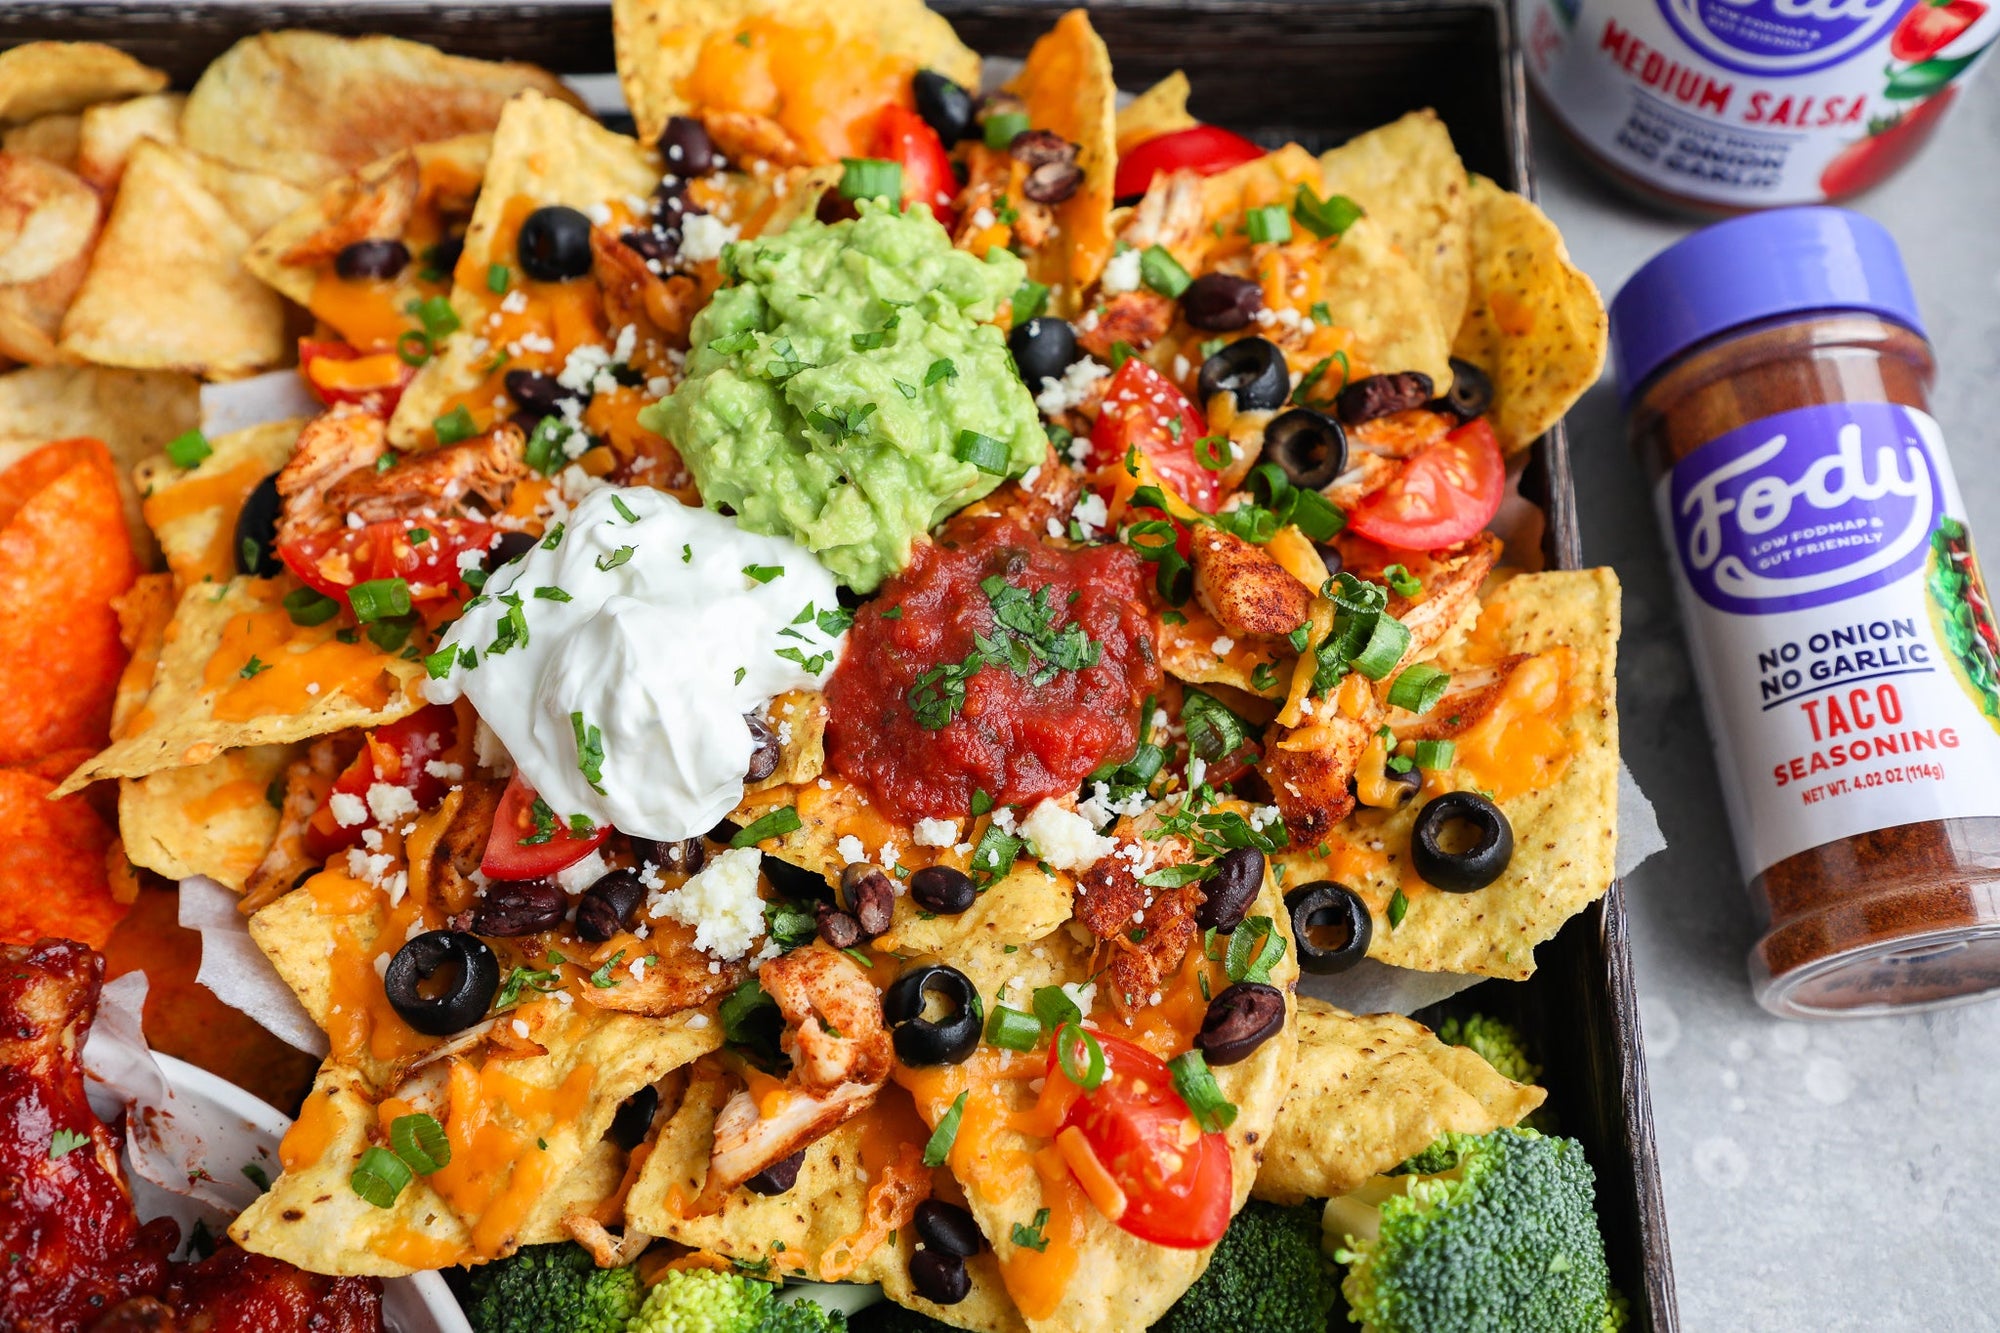 An image of Fody's spicy chicken low FODMAP nachos: yellow nachos topped with vegetables, black olives, guacamole, salsa and sour cream beside a bottle of Fody's taco seasoning.